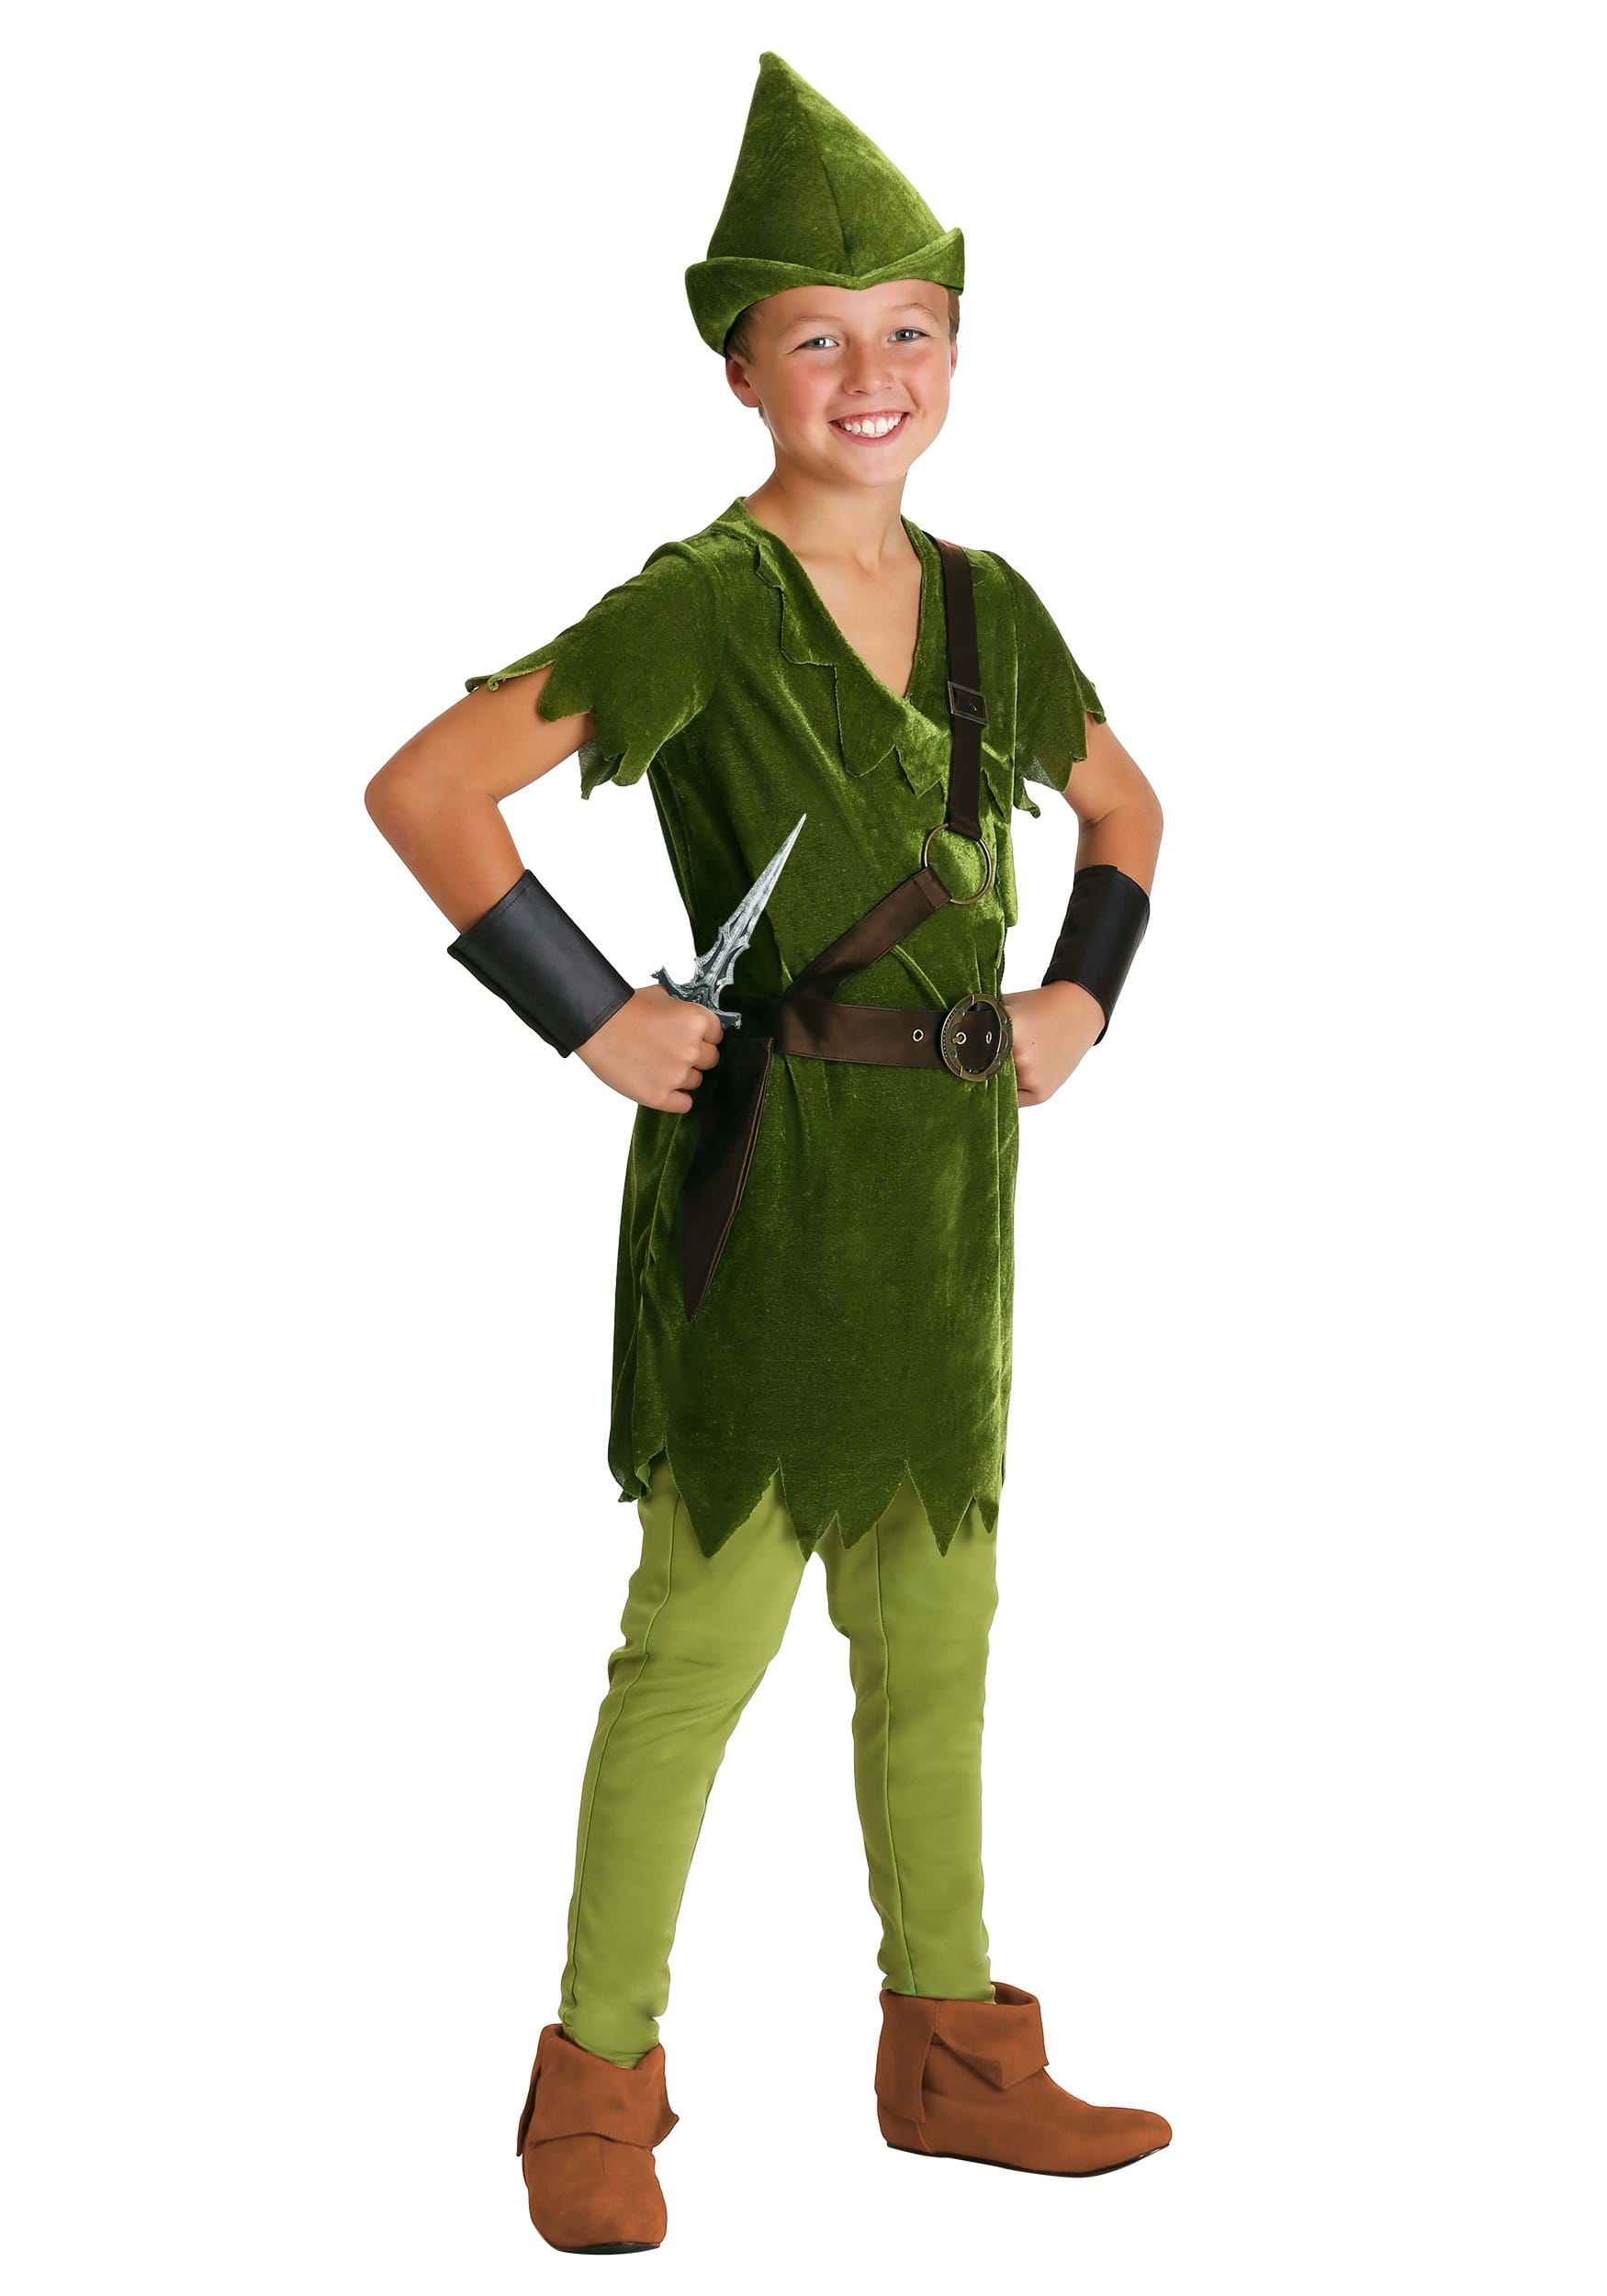 Kid's Peter Pan Costume with Hat, Shirt, Tights, Belt/Harness and Wrist Cuffs